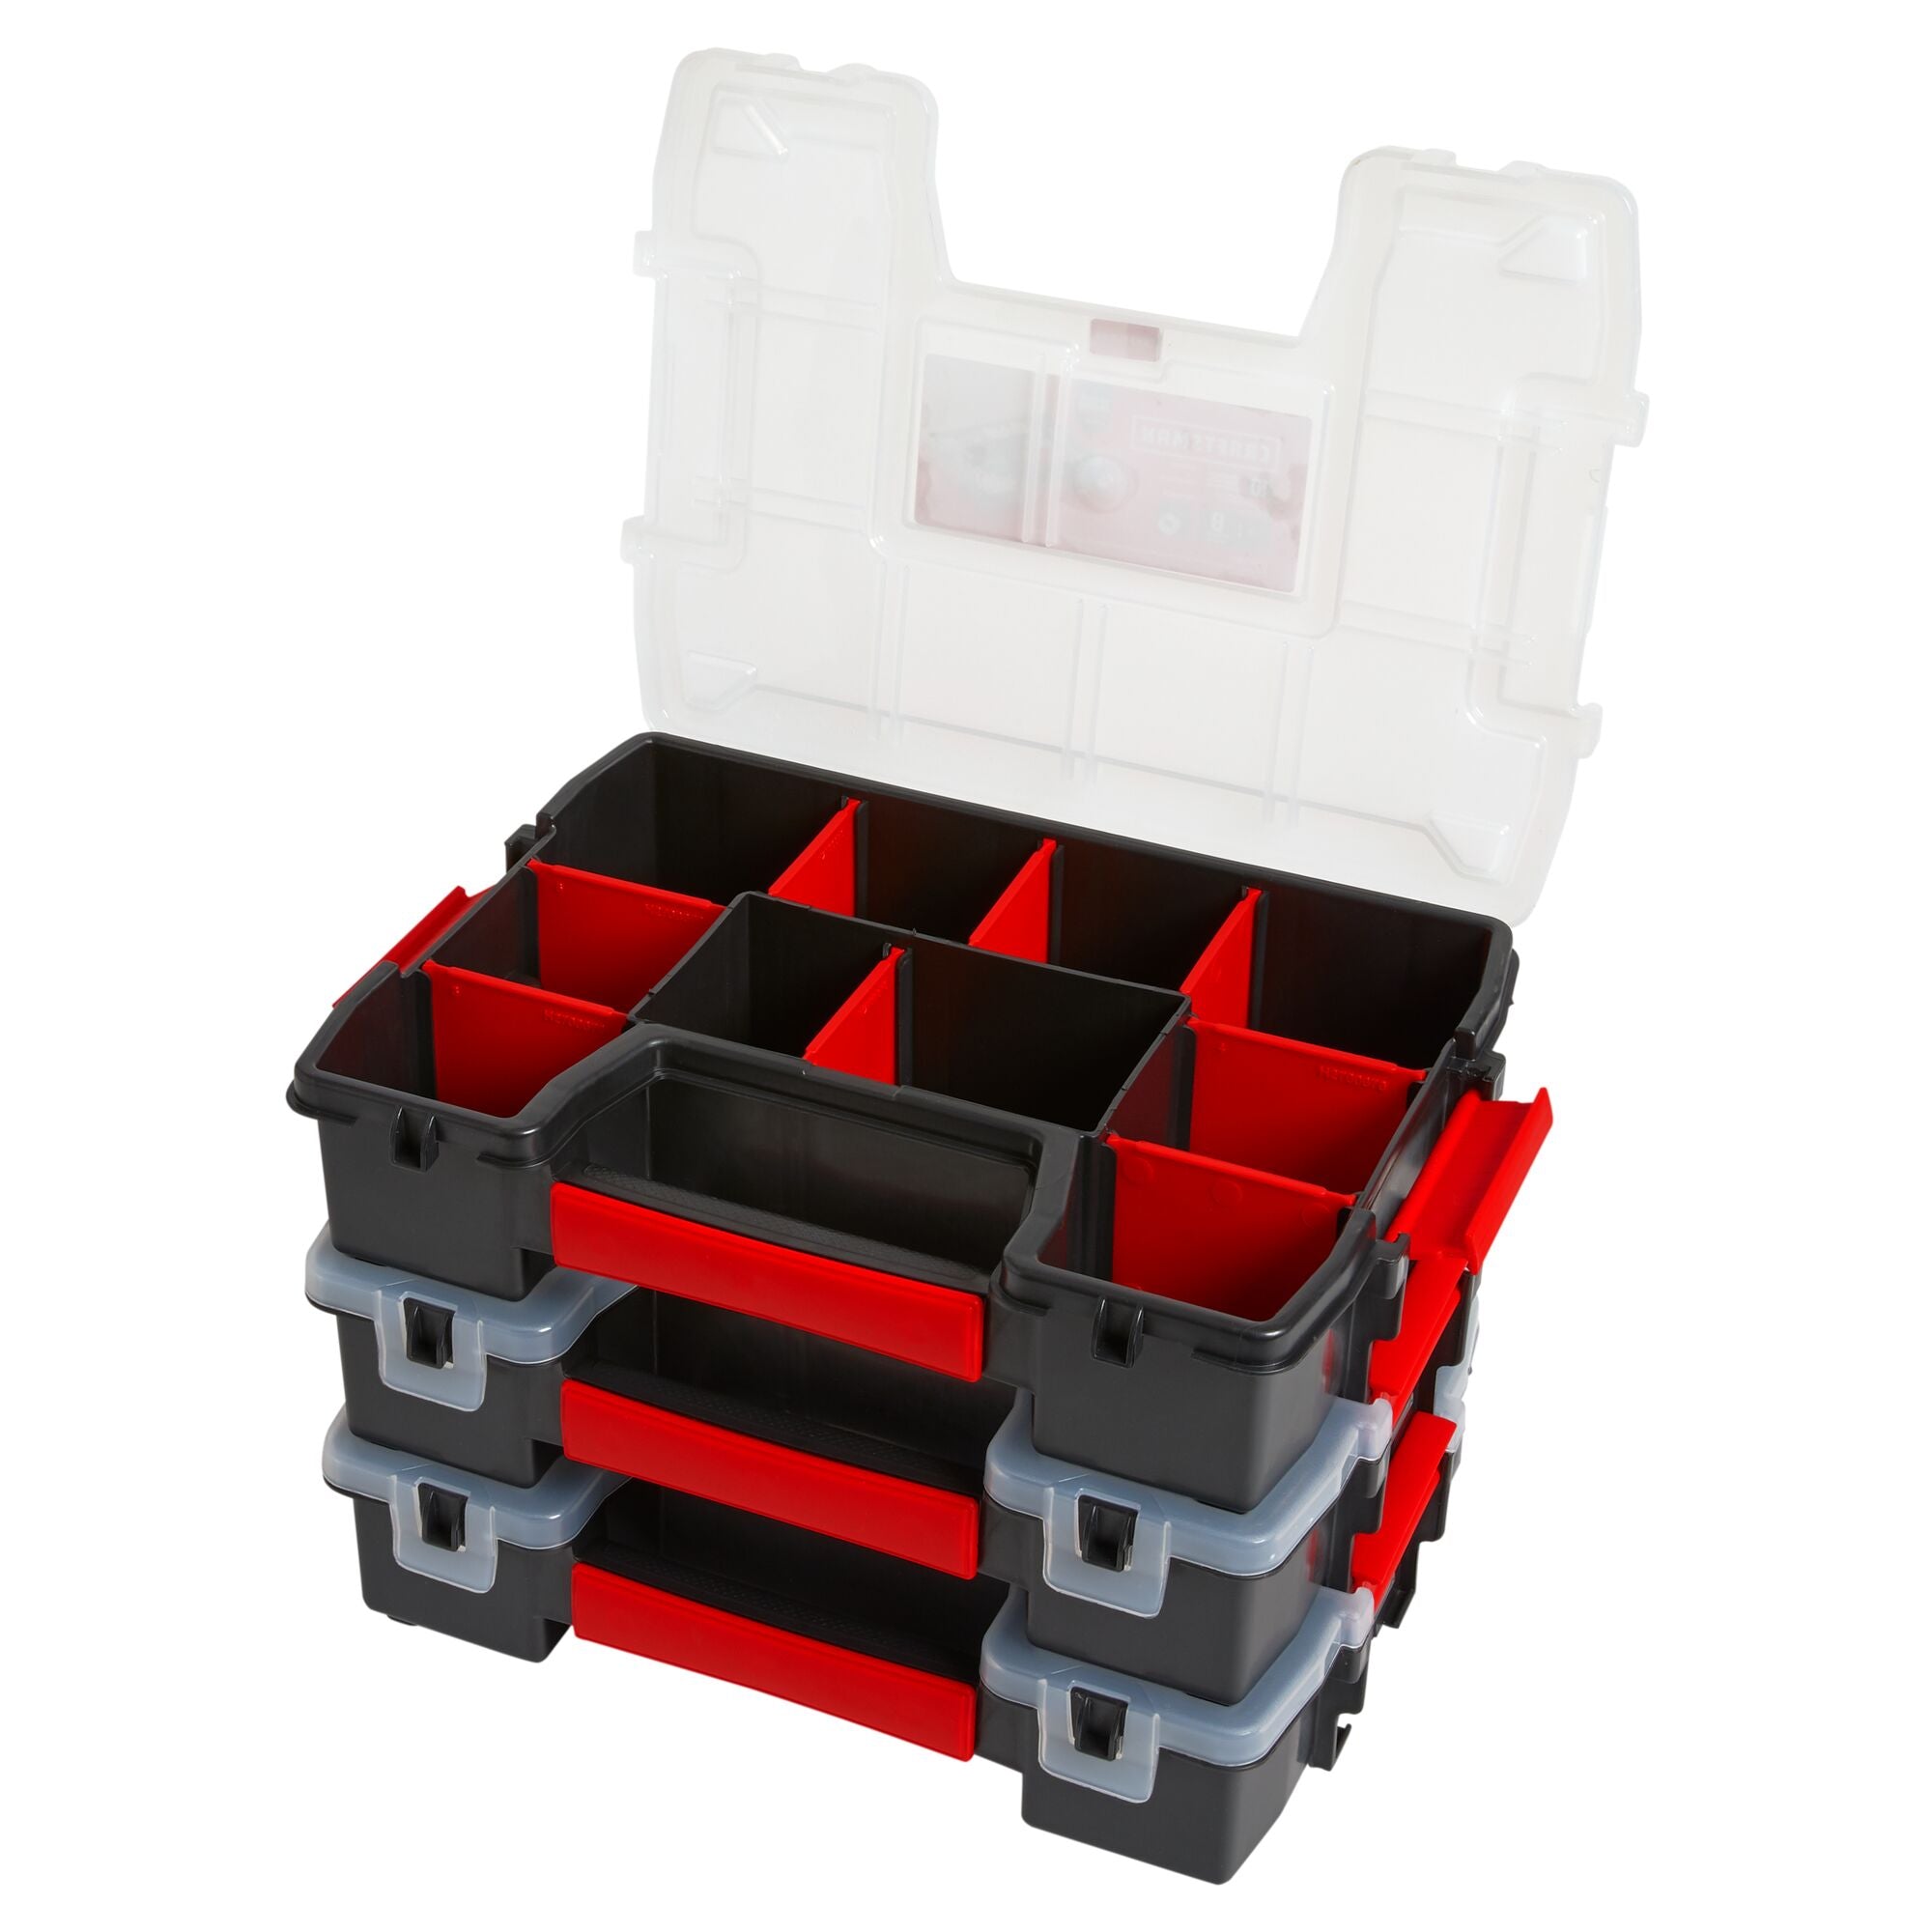 Small Parts Organizer with Removable Dividers